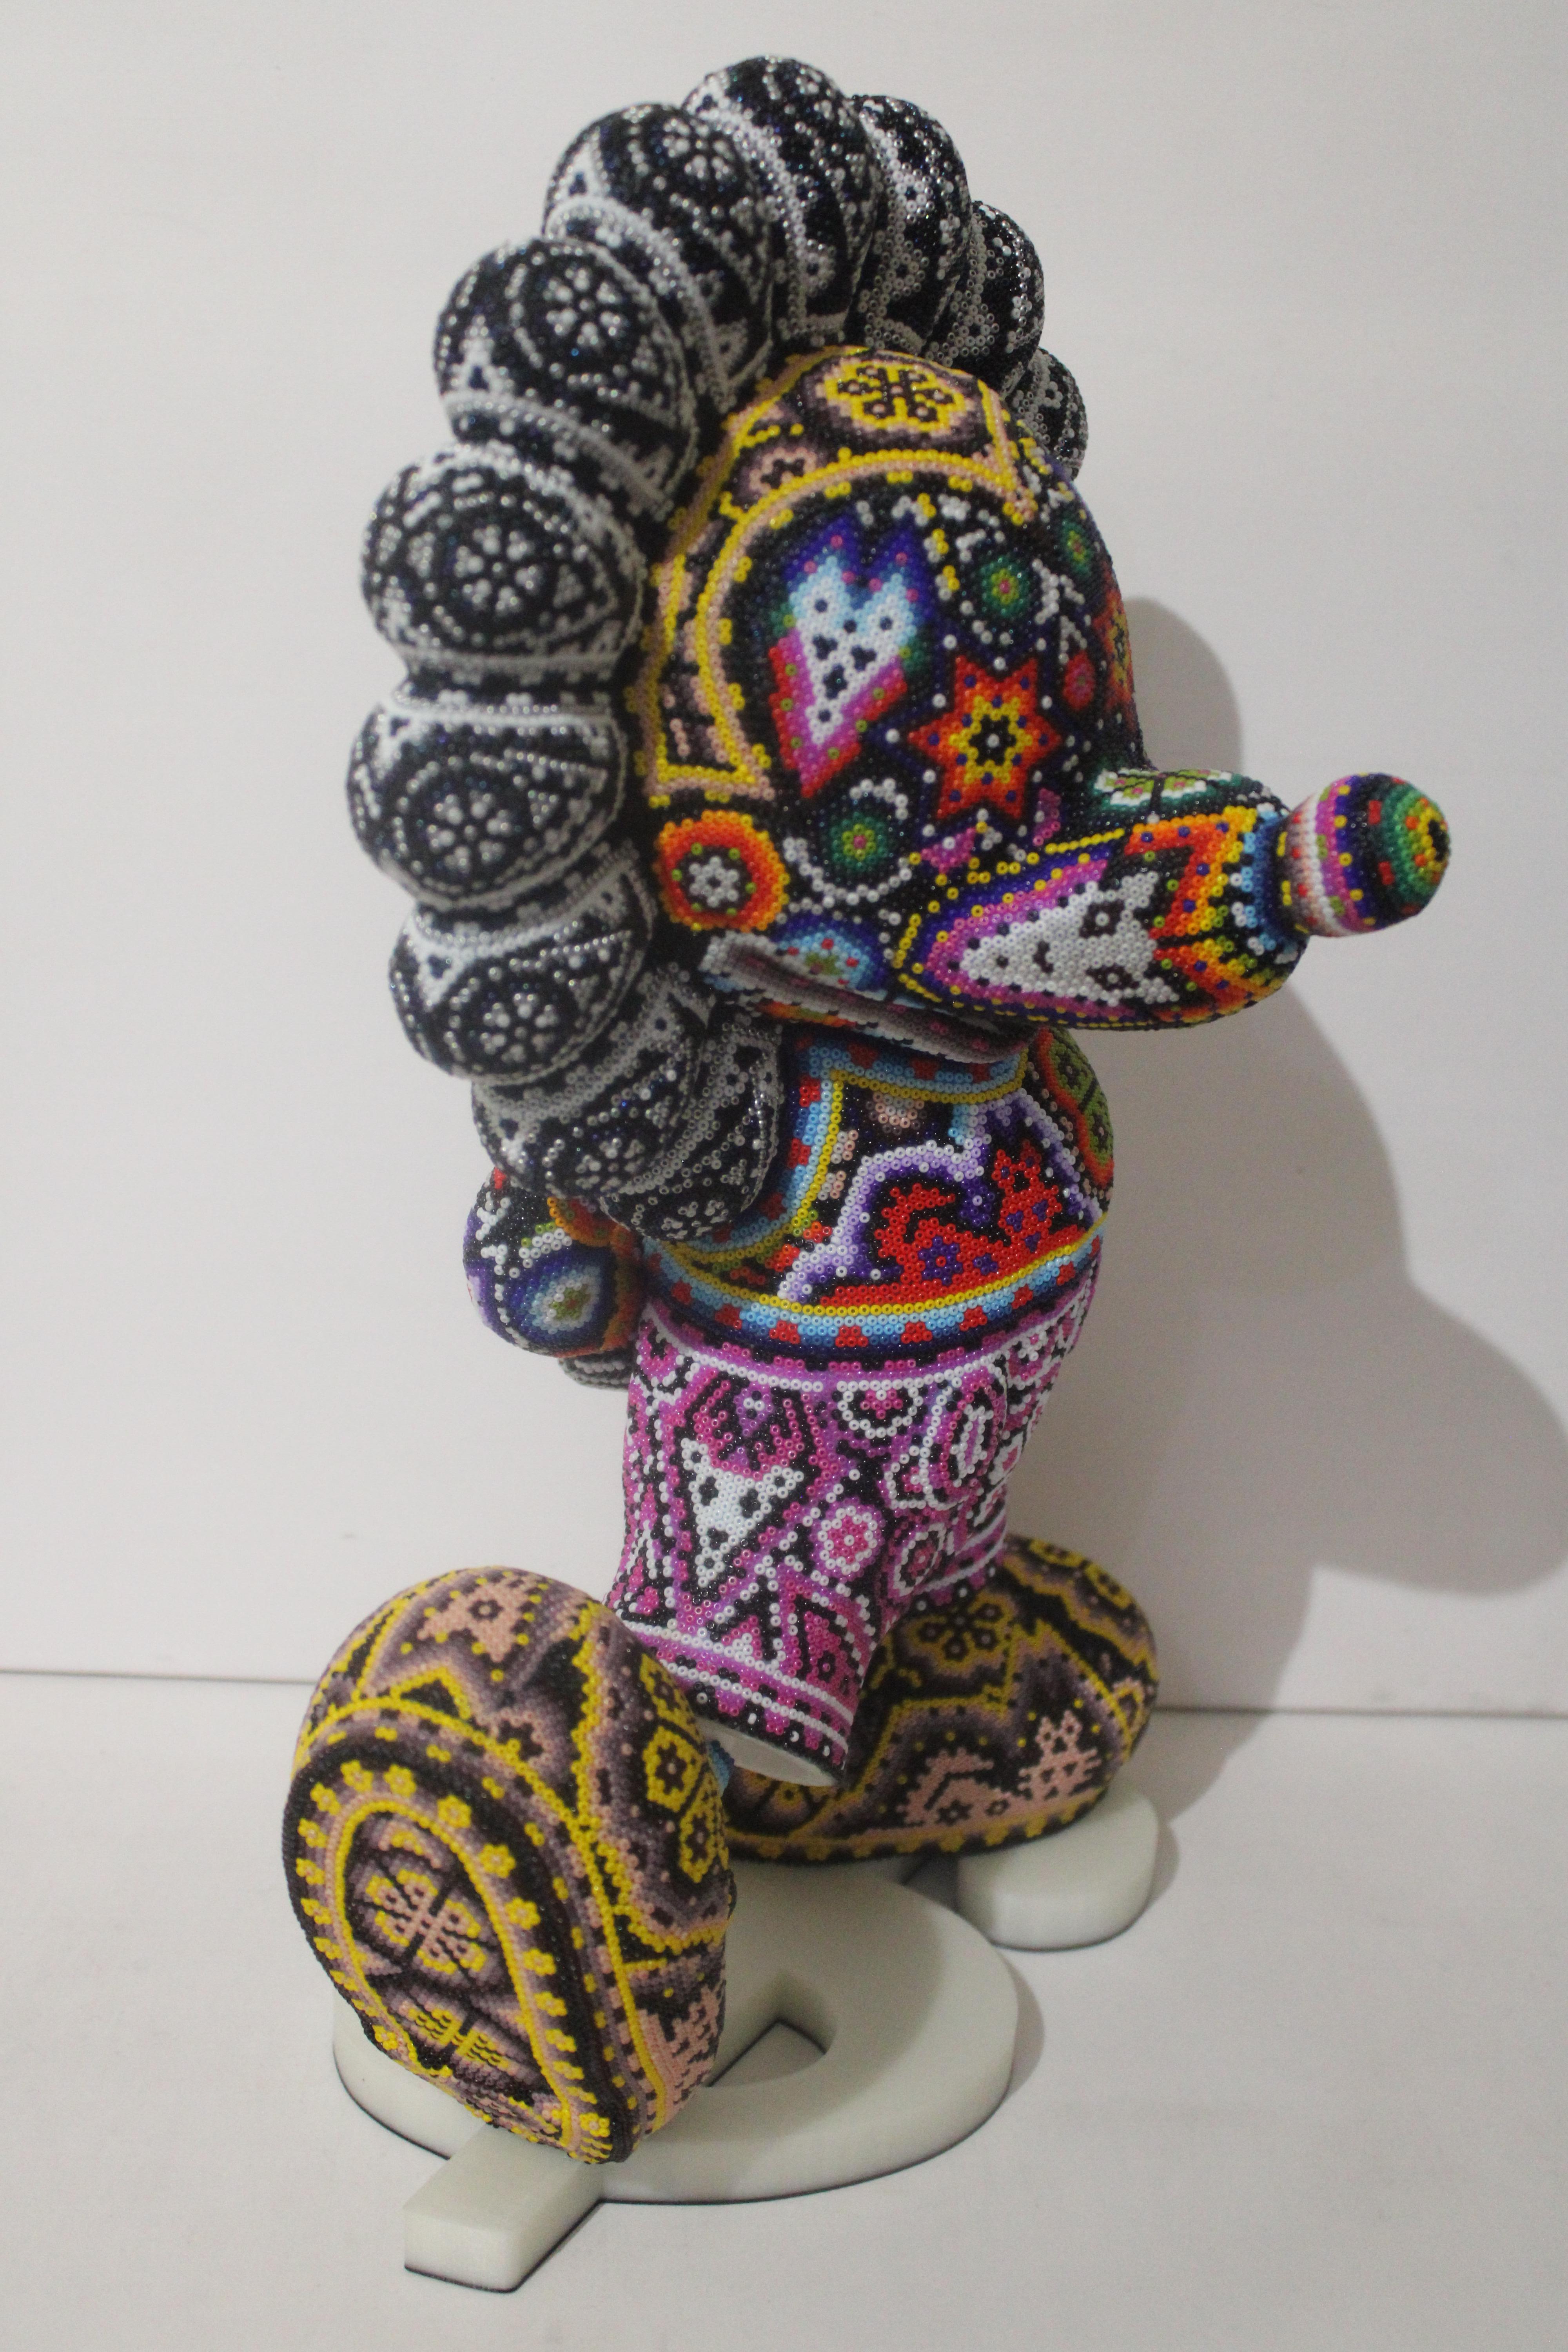 CHROMA aka Rick Wolfryd  Abstract Sculpture - "Money Mouse" from Huichol ALTERATIONS